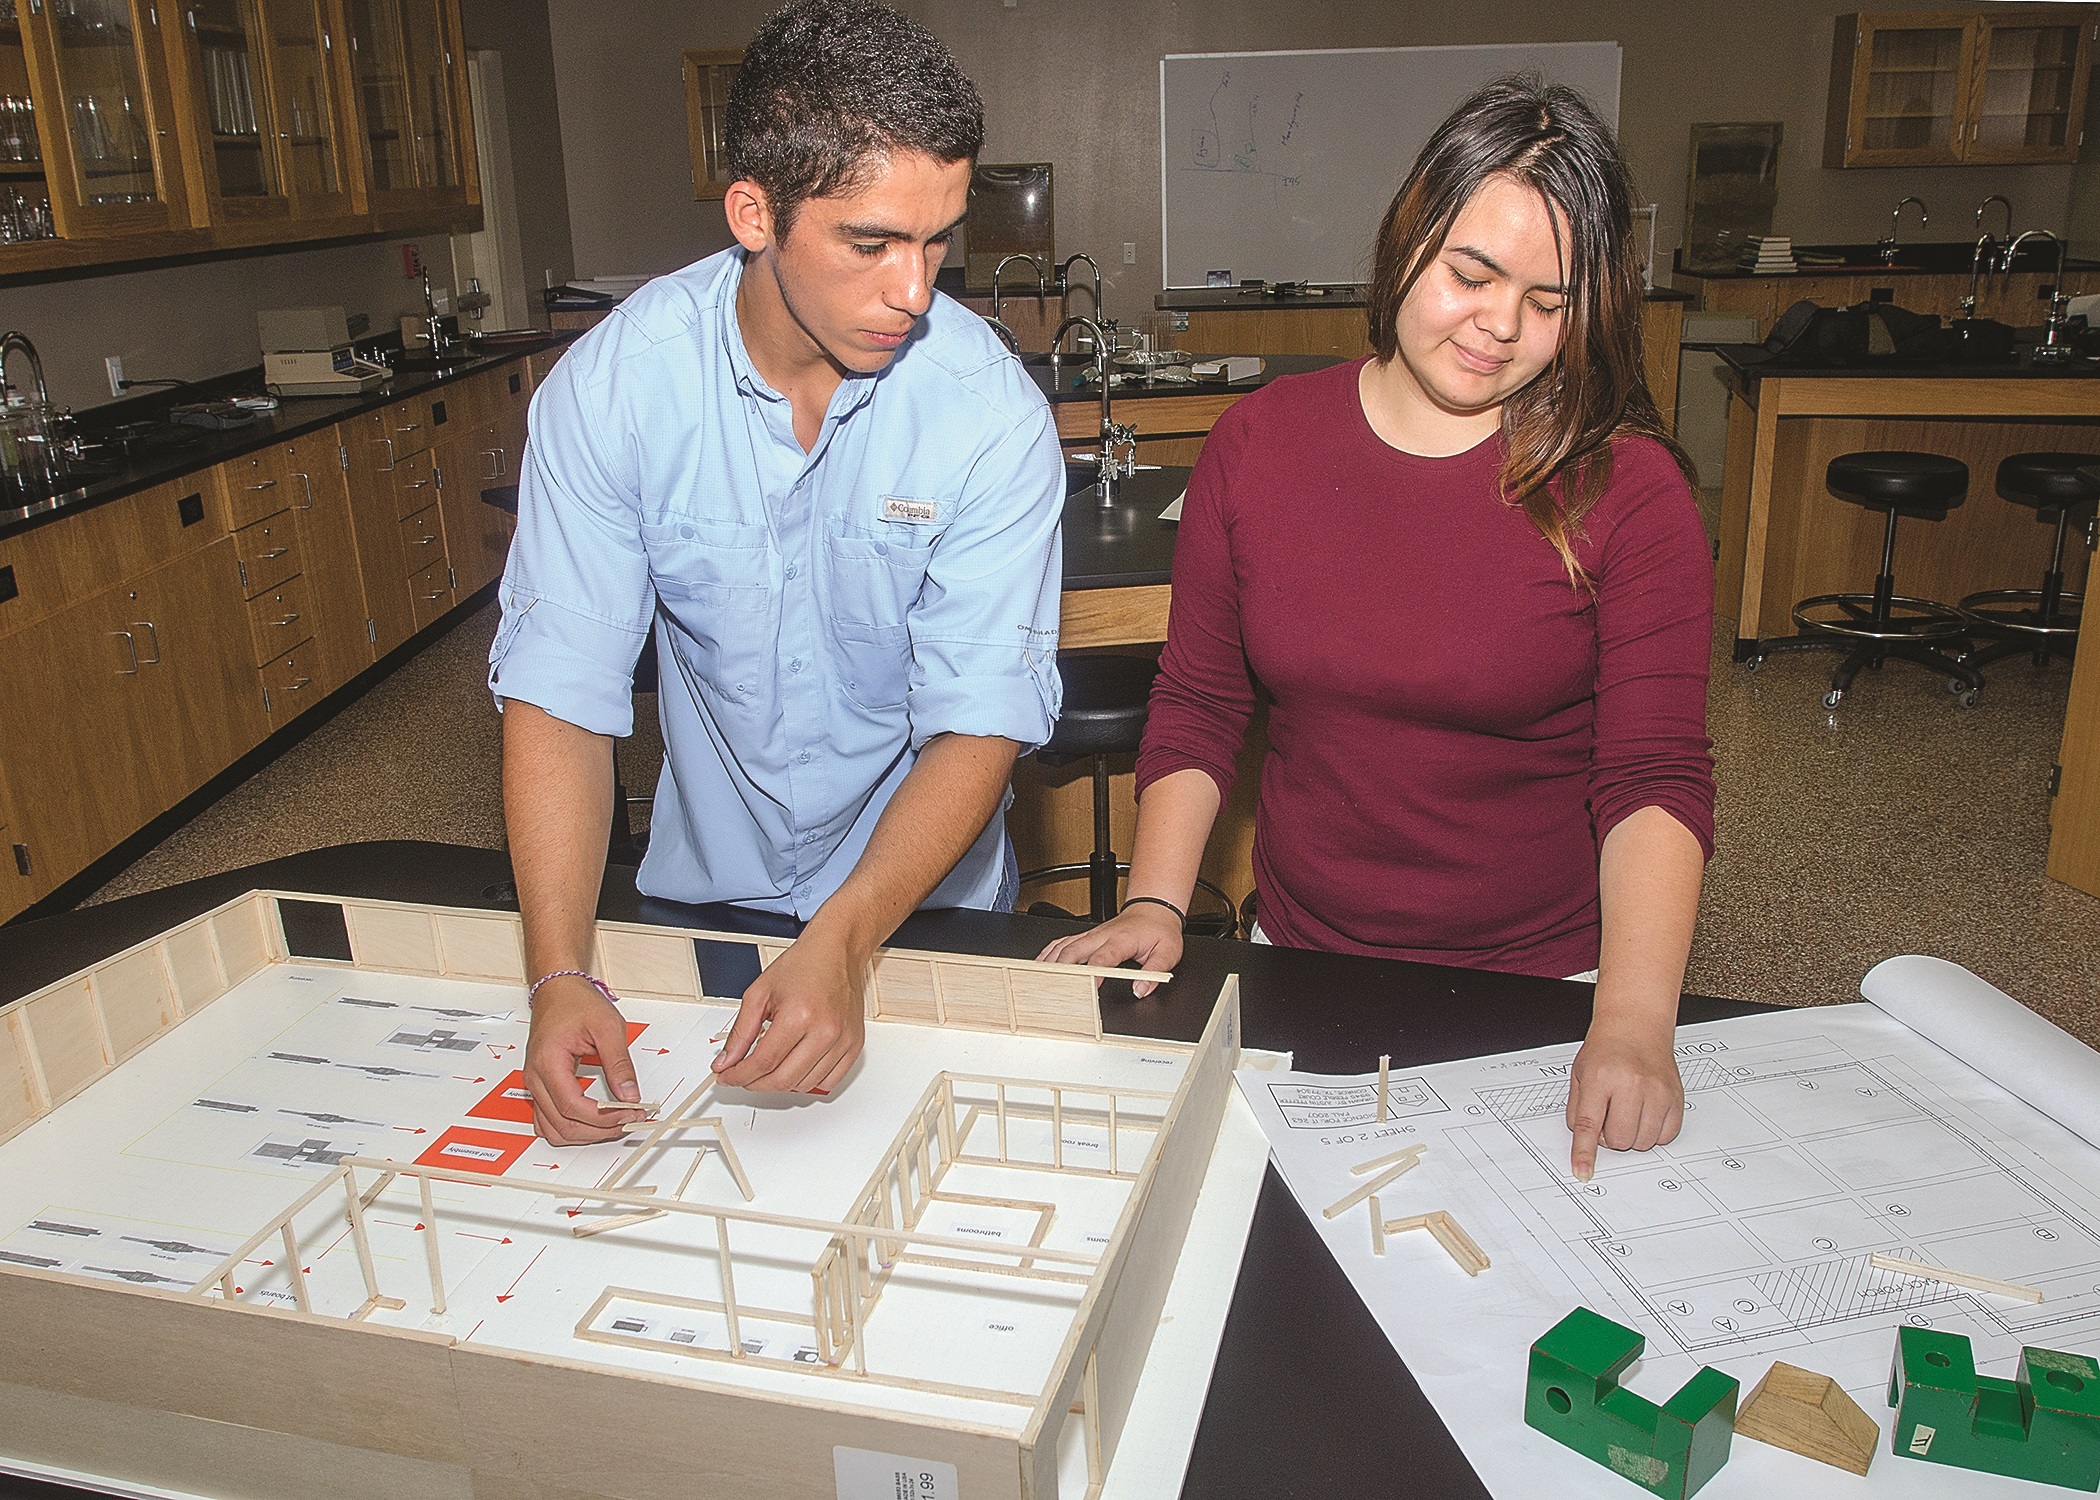 Students Study Electrical Plans